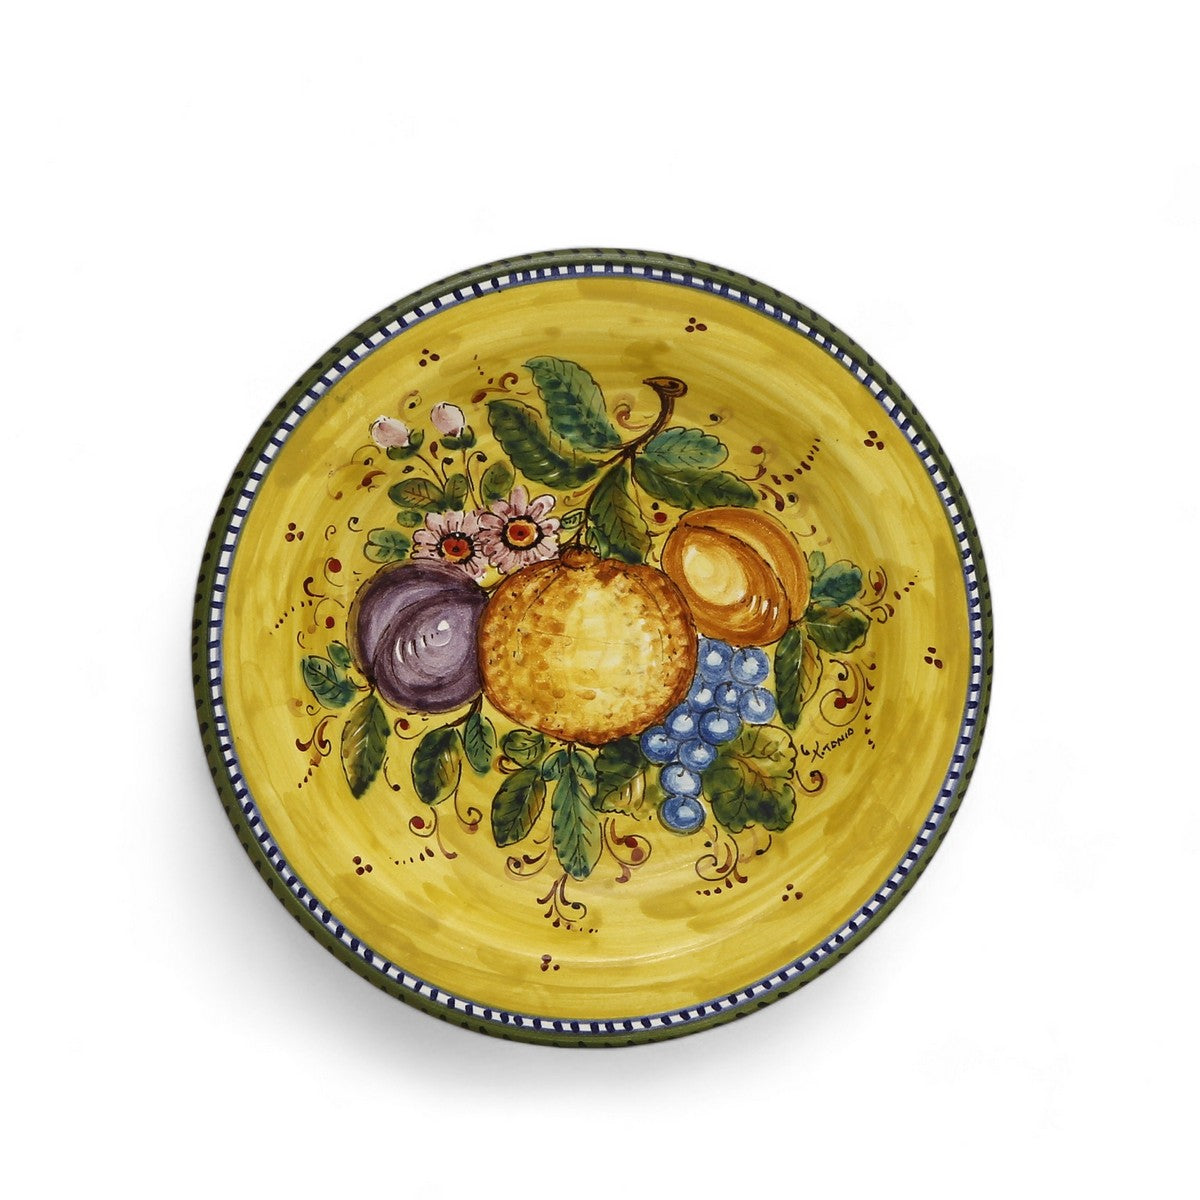 TUSCAN MAJOLICA: Small wall plates featuring a traditional Tuscan design with a Yellow background - SET OF 3 PCS -